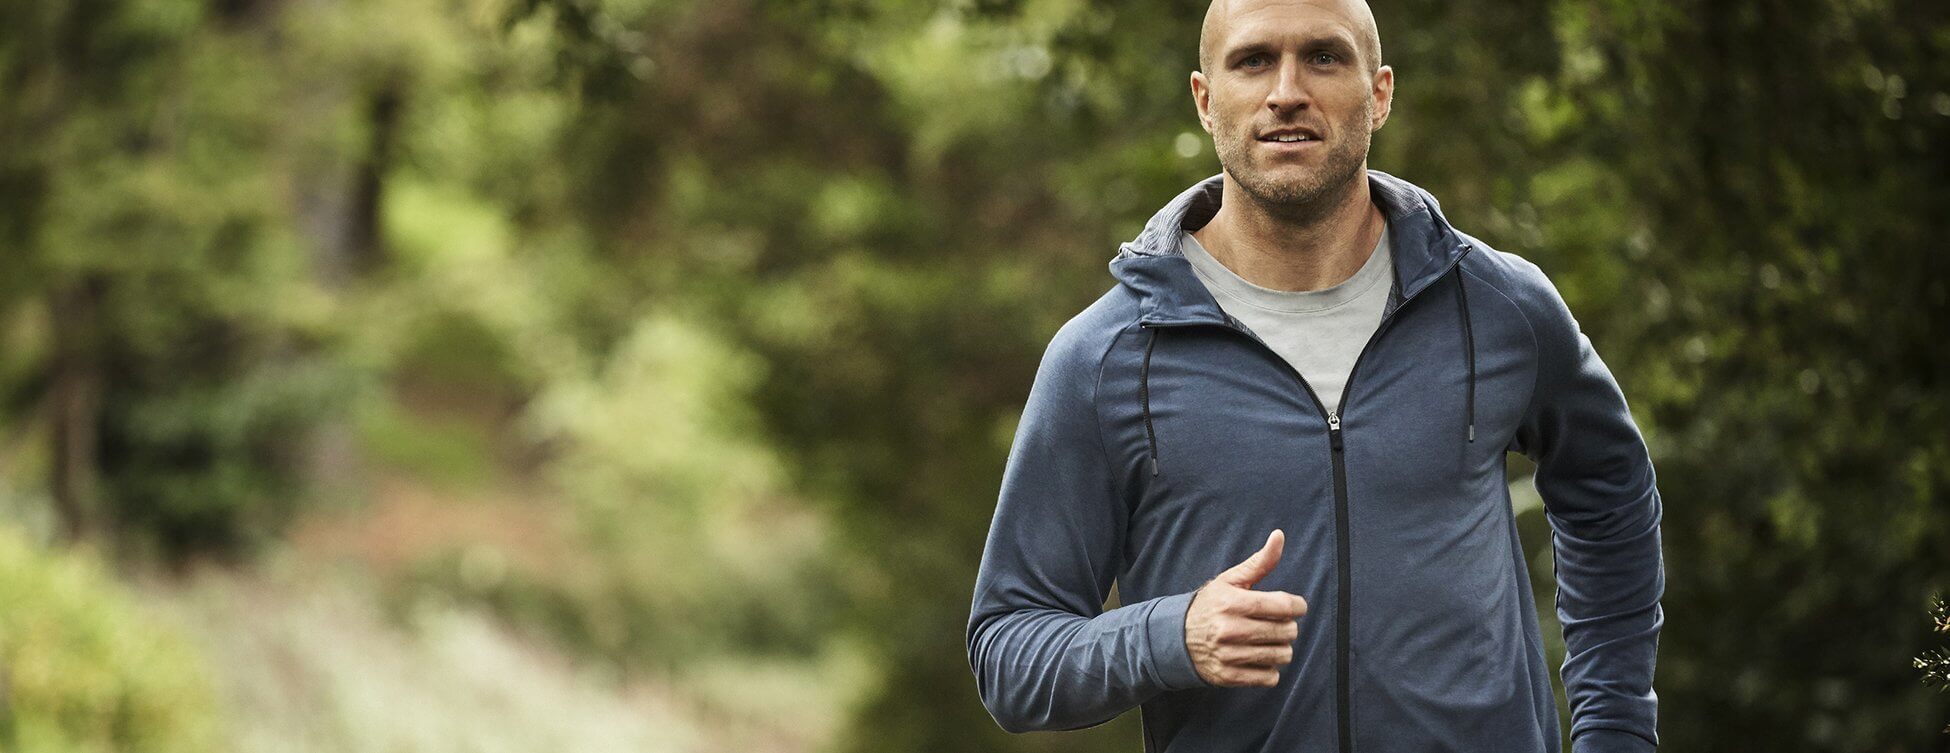 Chris Judd: 4 tips for easing back into a fitness routine